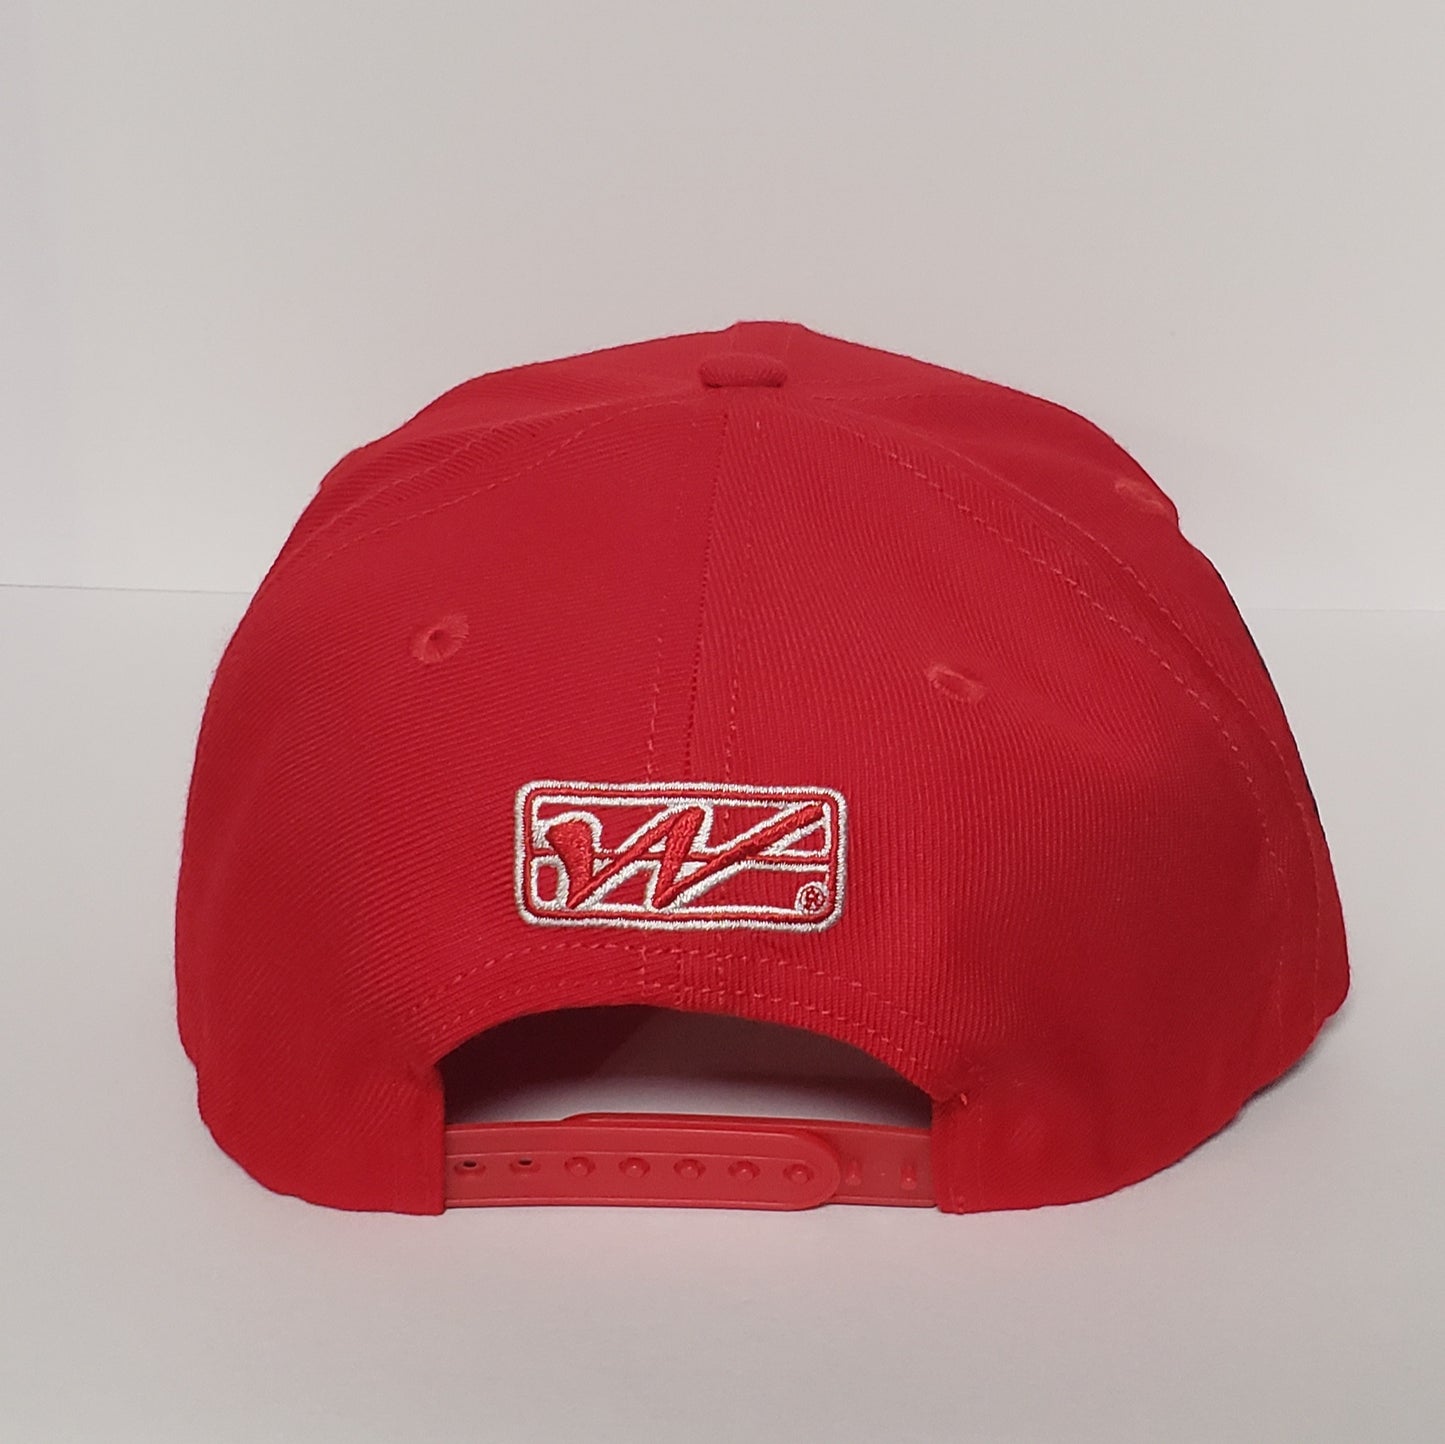 Wicked Logo Snapback hat - Red/Red